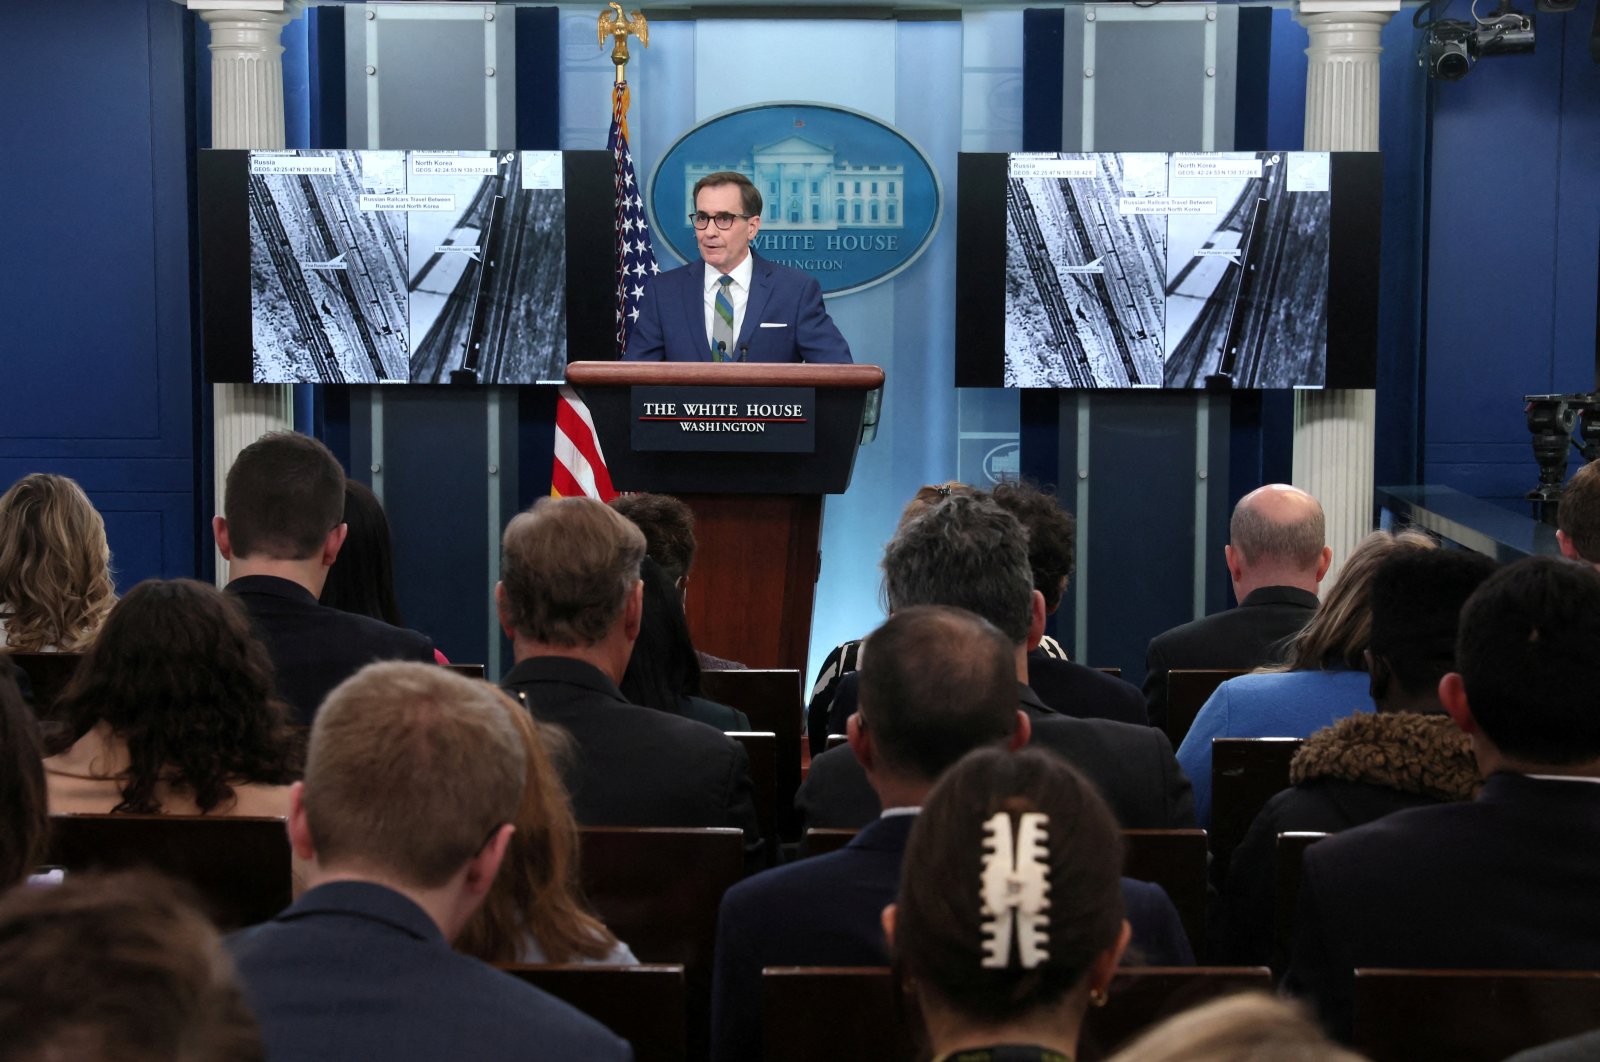 White House National Security Council Strategic Communications Coordinator John Kirby presents images that allege railcar movement between Russia and North Korea during a press briefing at the White House in Washington, U.S., Jan. 20, 2023. (Reuters Photo)